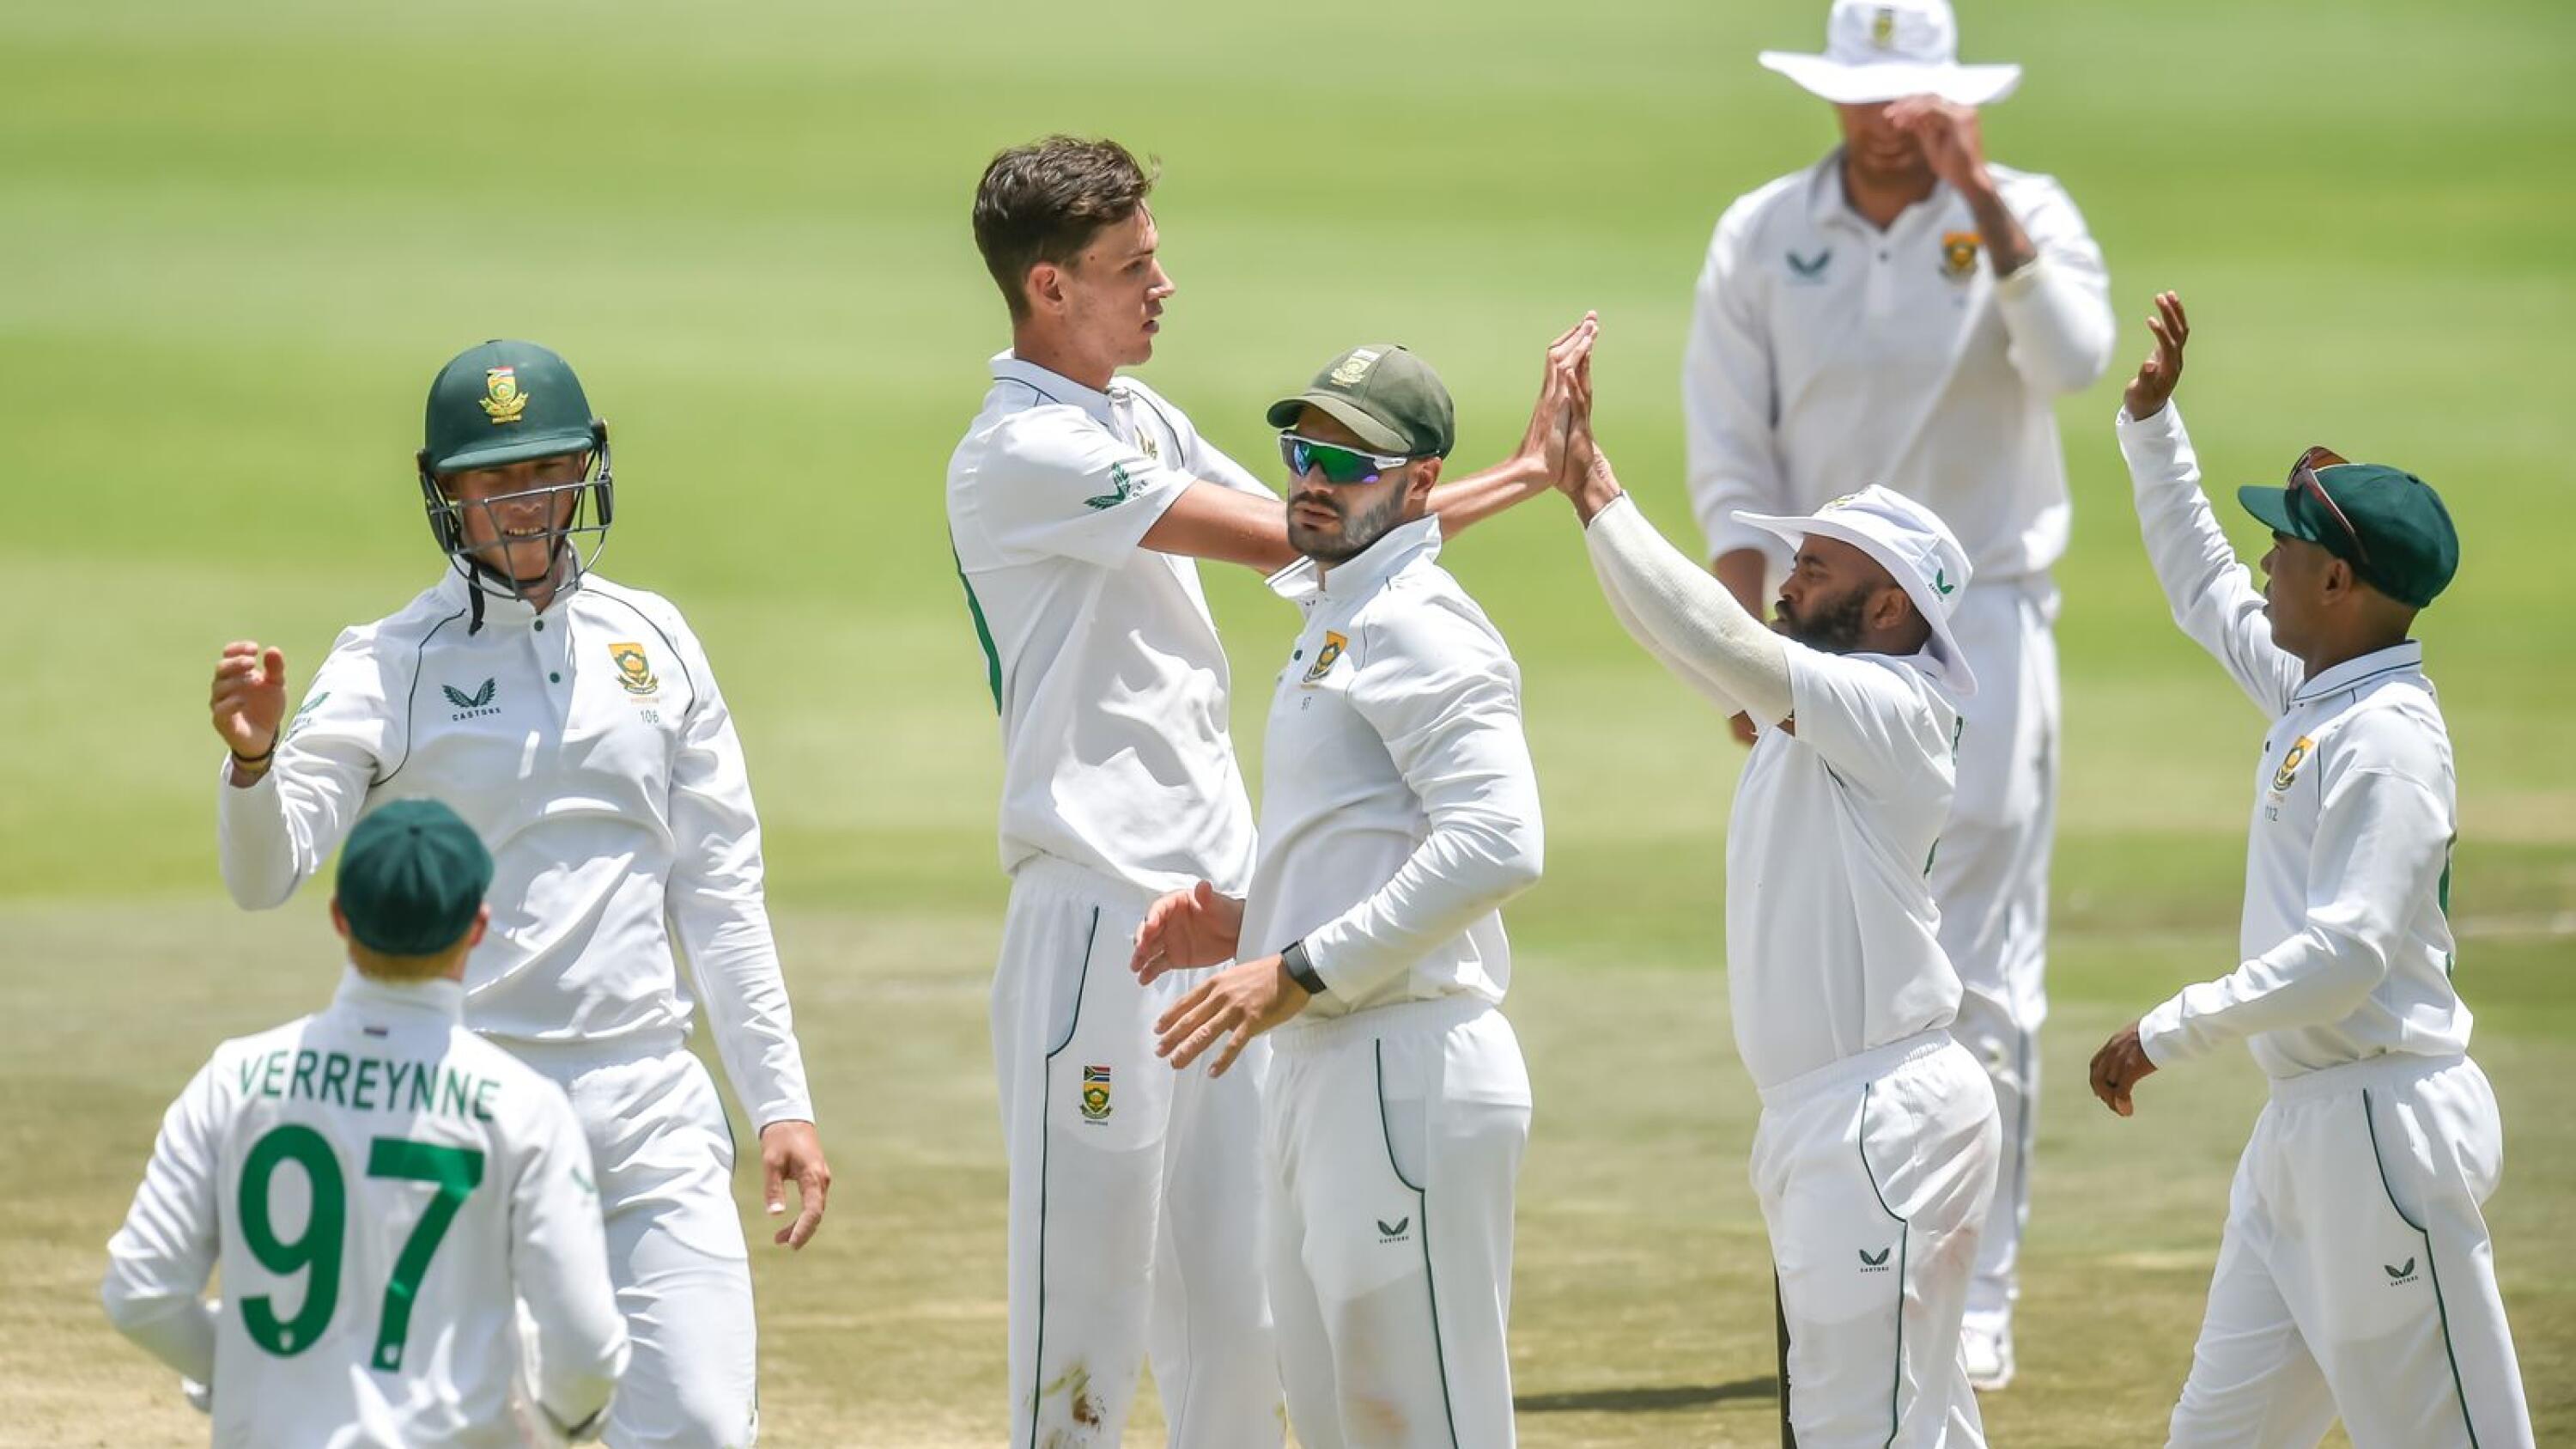 Marco Jansen of South Africa celebrates after getting the wicket of Mohd Shami of India during day 3 of the 2nd Test at the Wanderers in Johannesburg on Wednesday